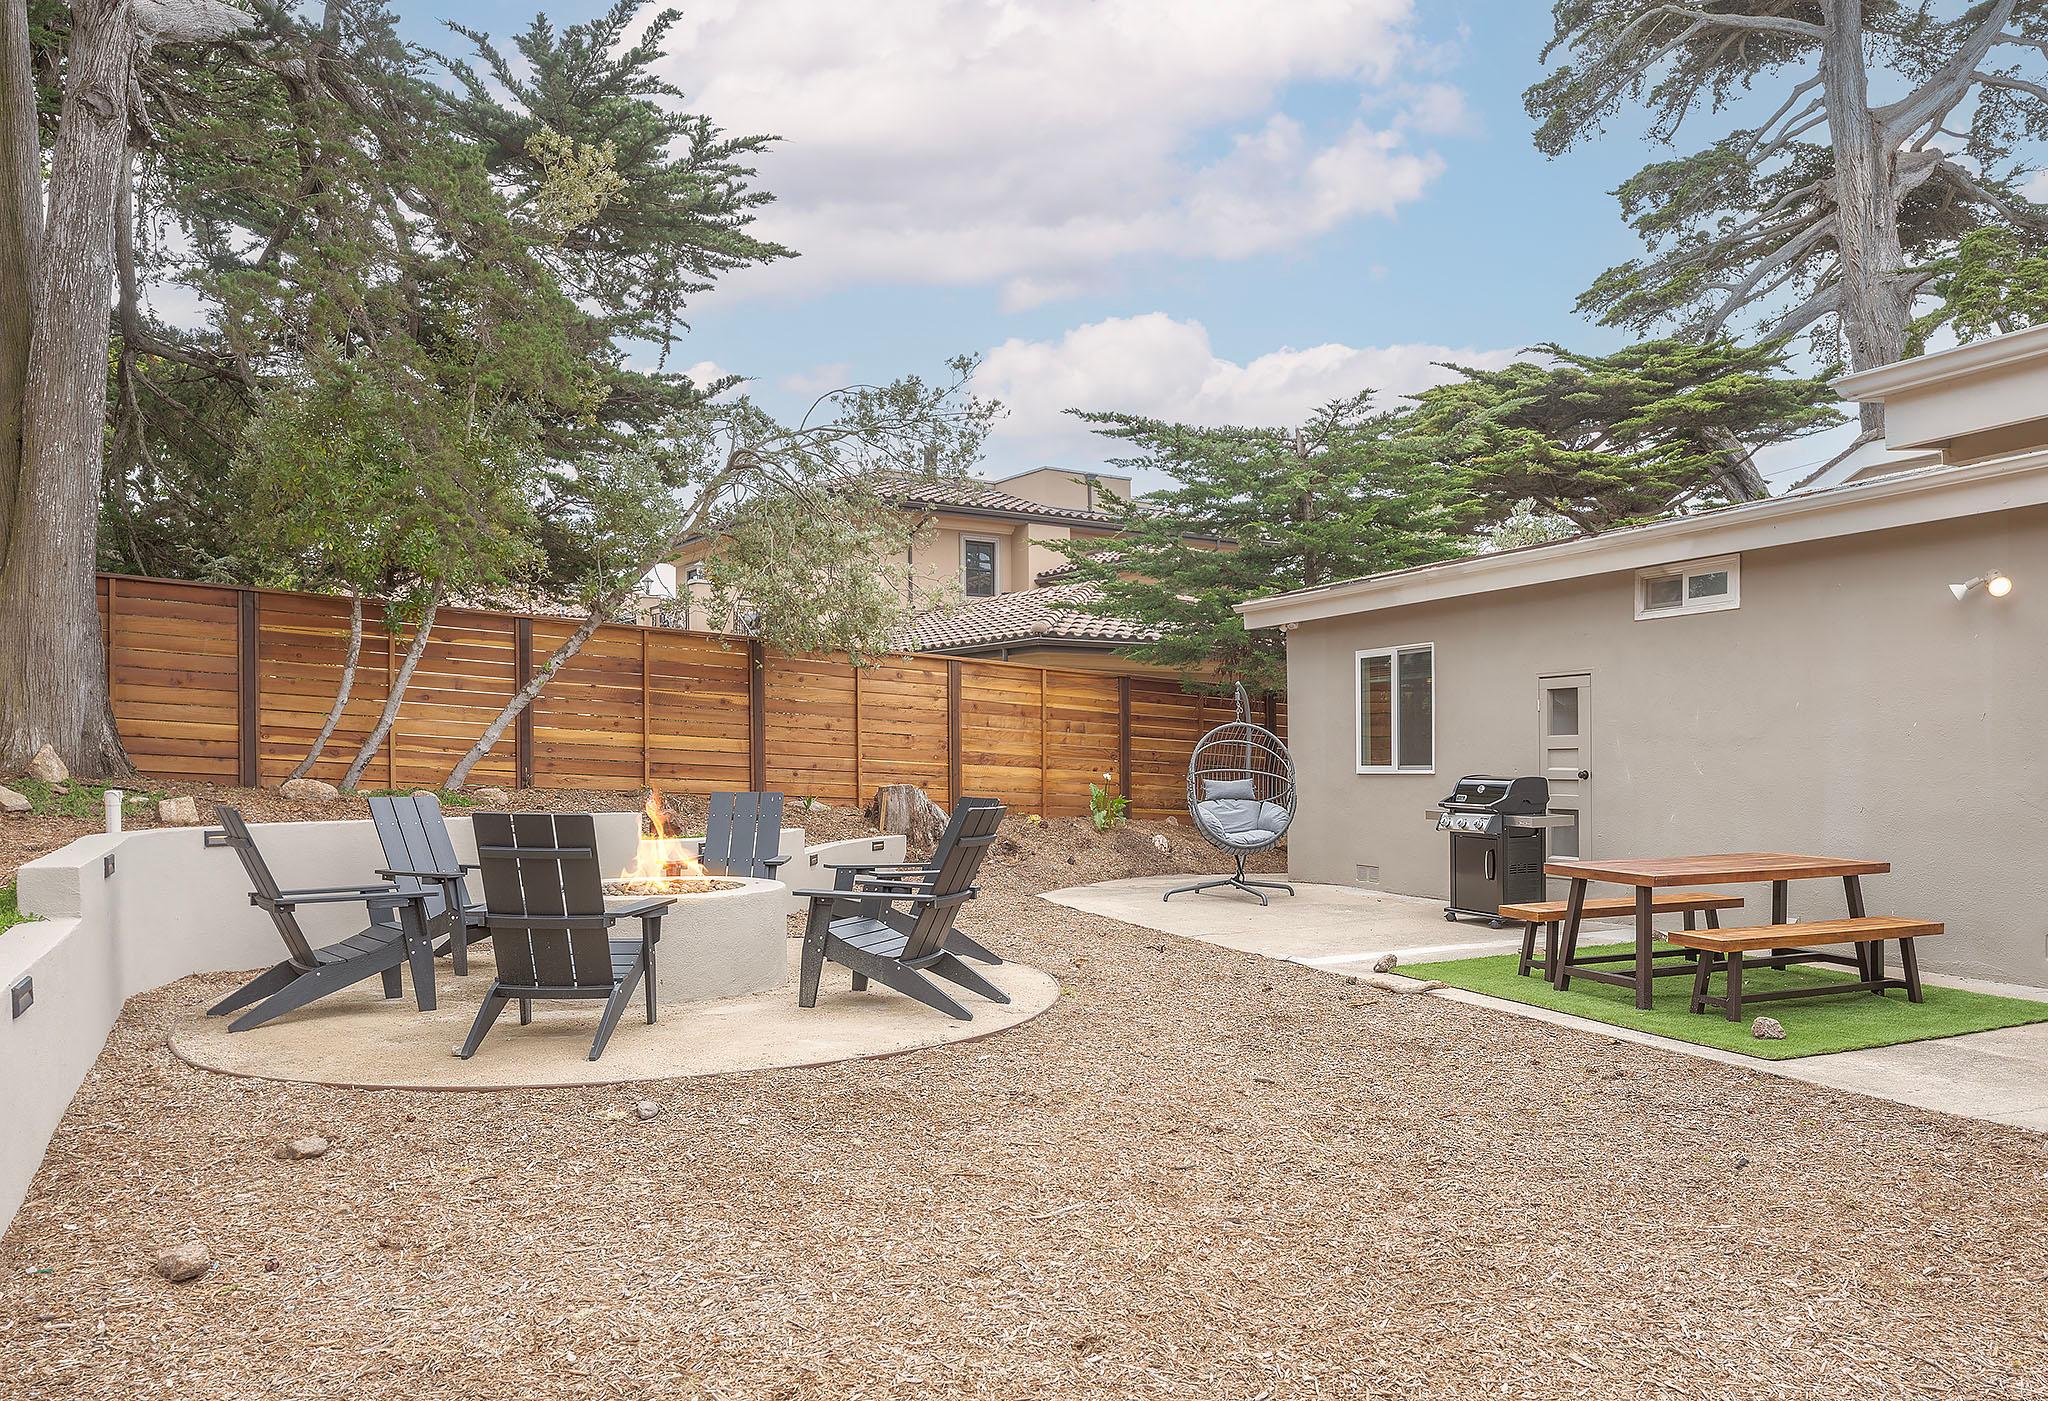 Fenced Back Yard with Seating, Fire Pit and Gas BBQ